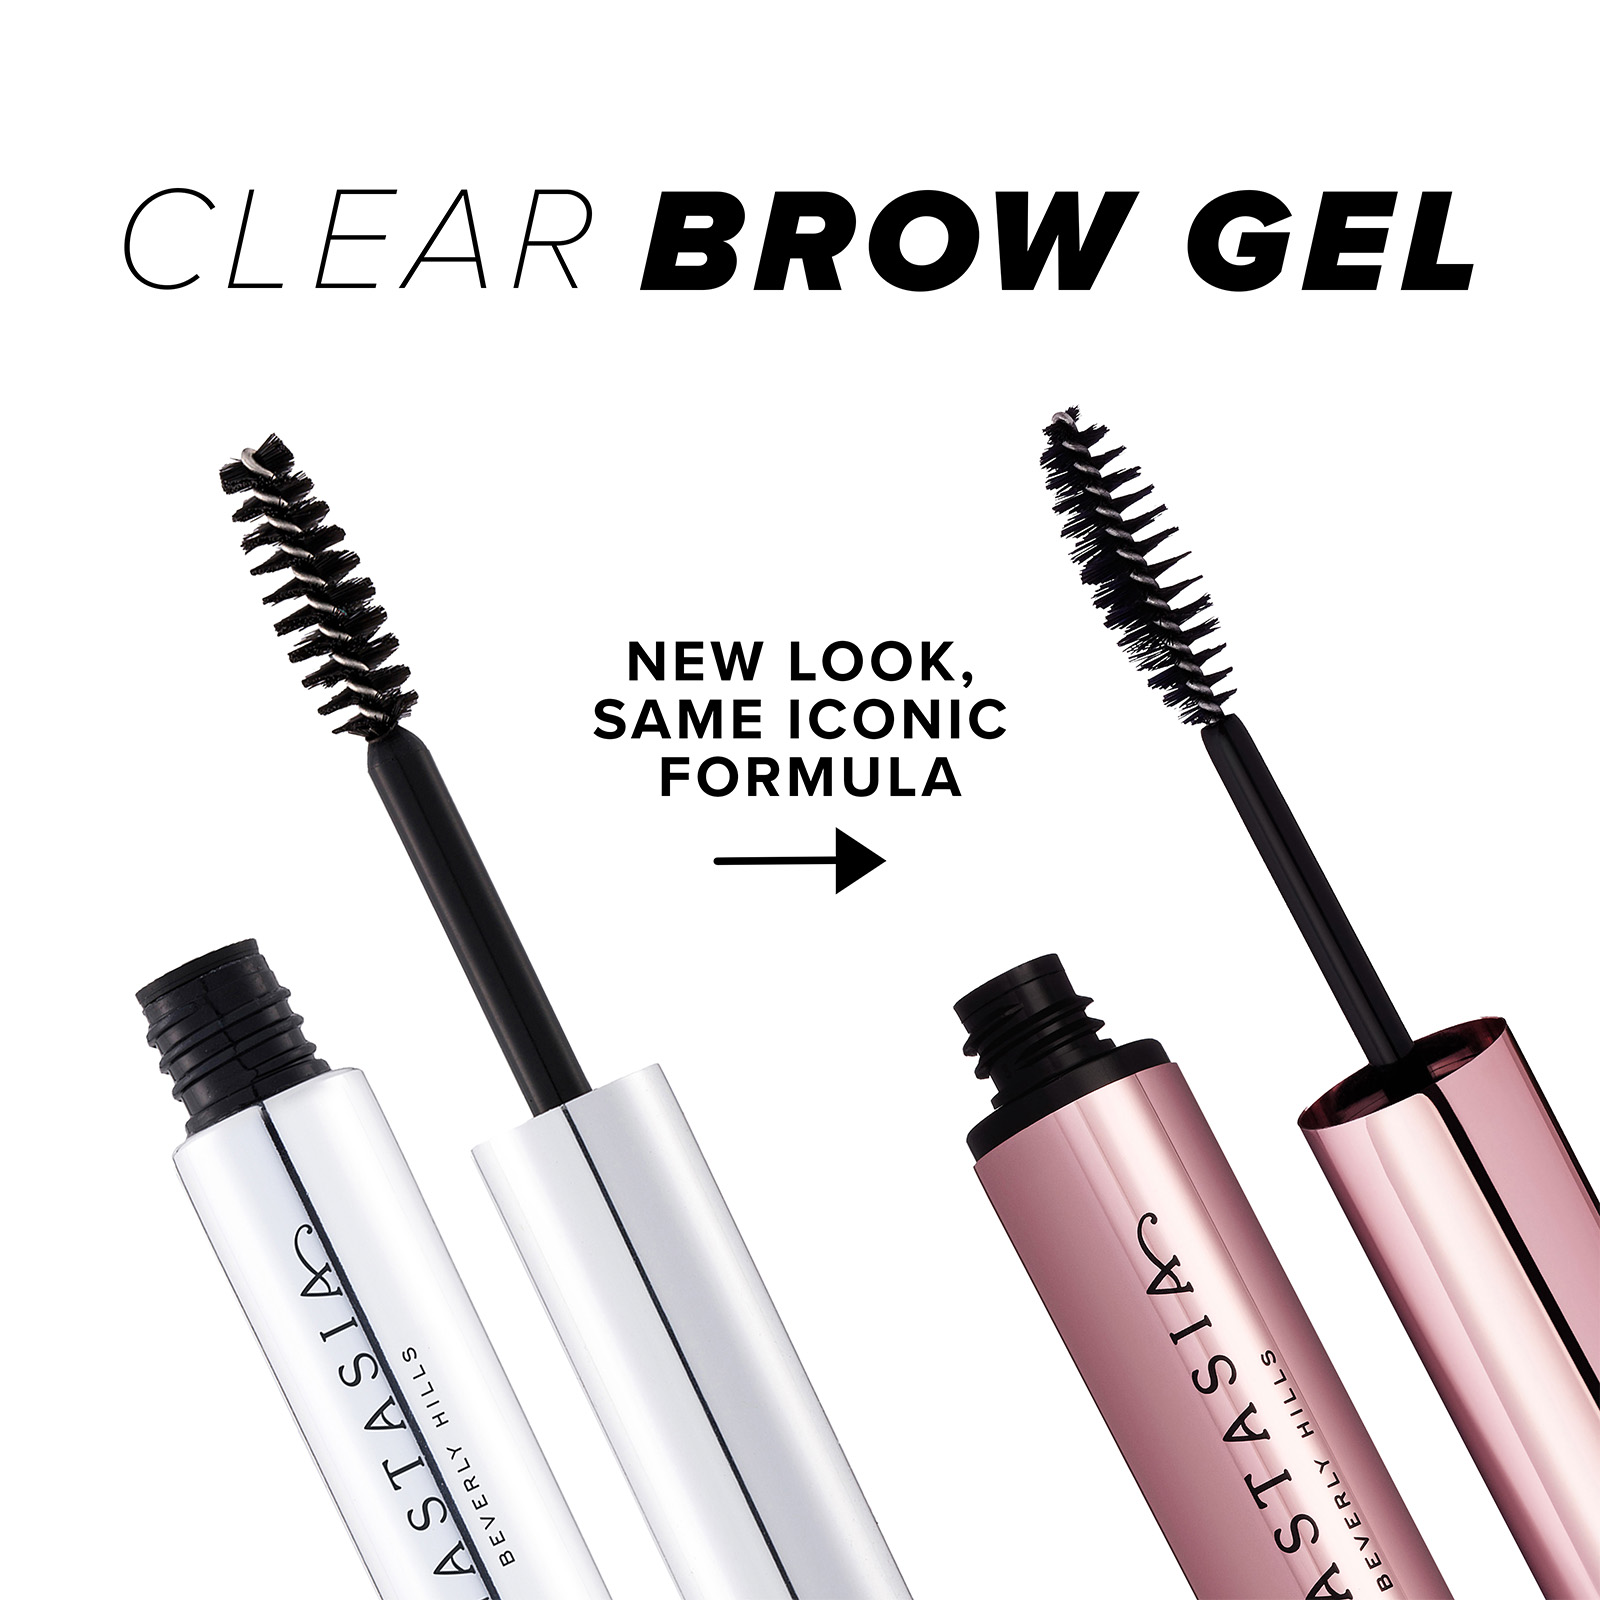 Clear brow gel. New look same iconic formula